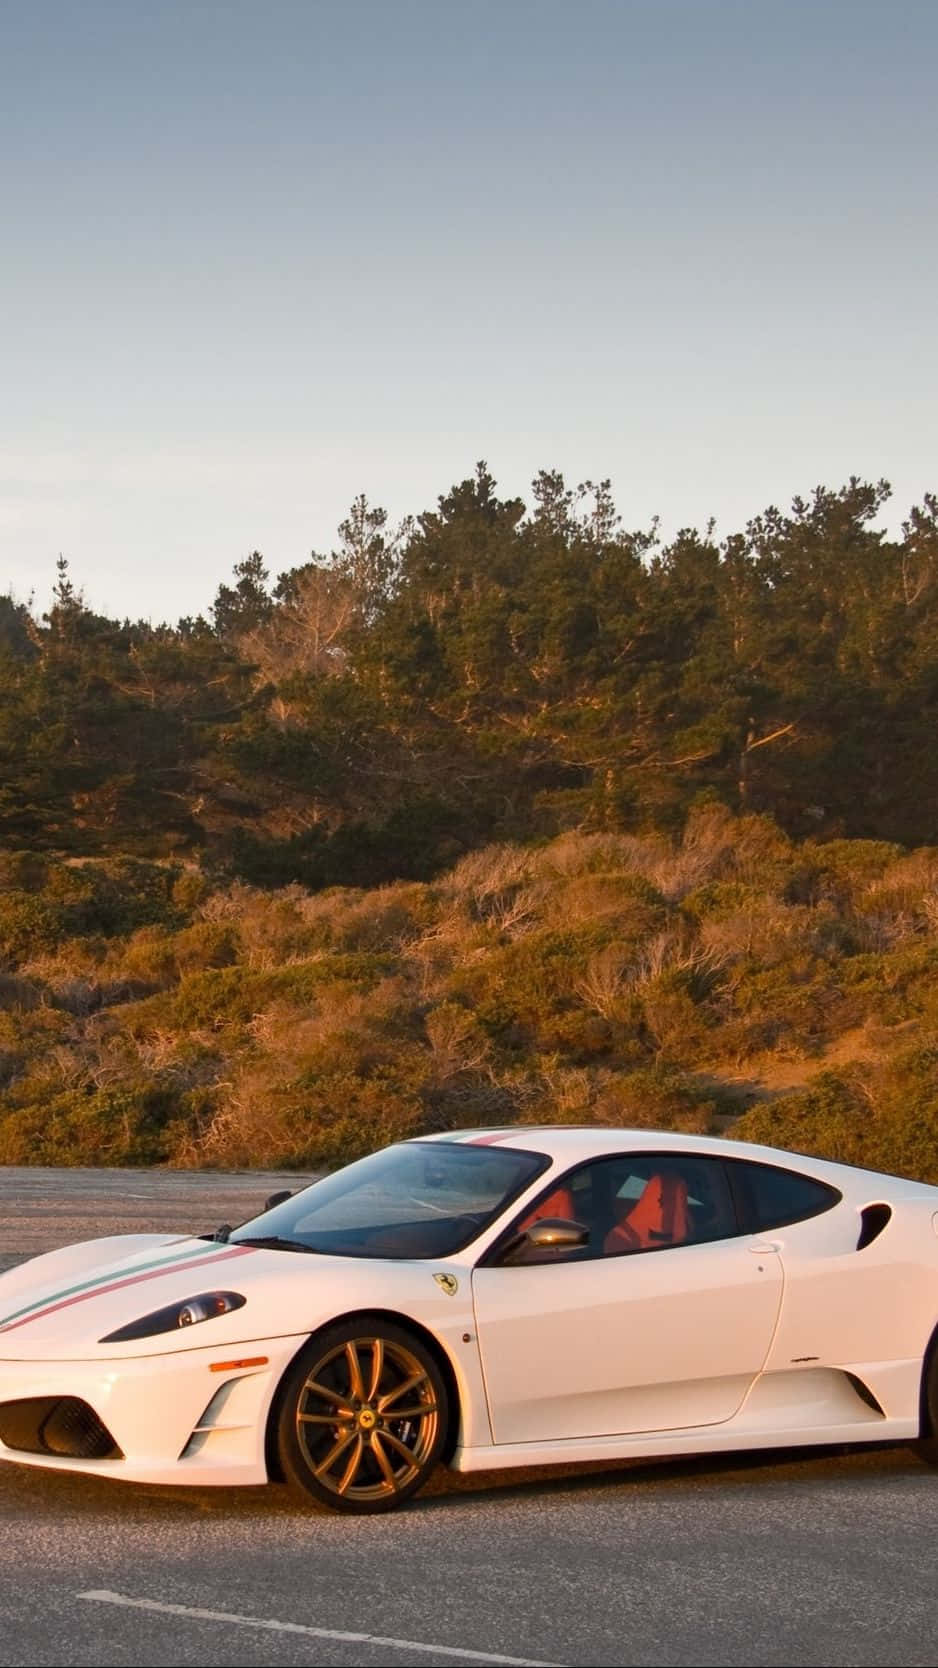 Enjoy the life of luxury with a White Ferrari iPhone Wallpaper